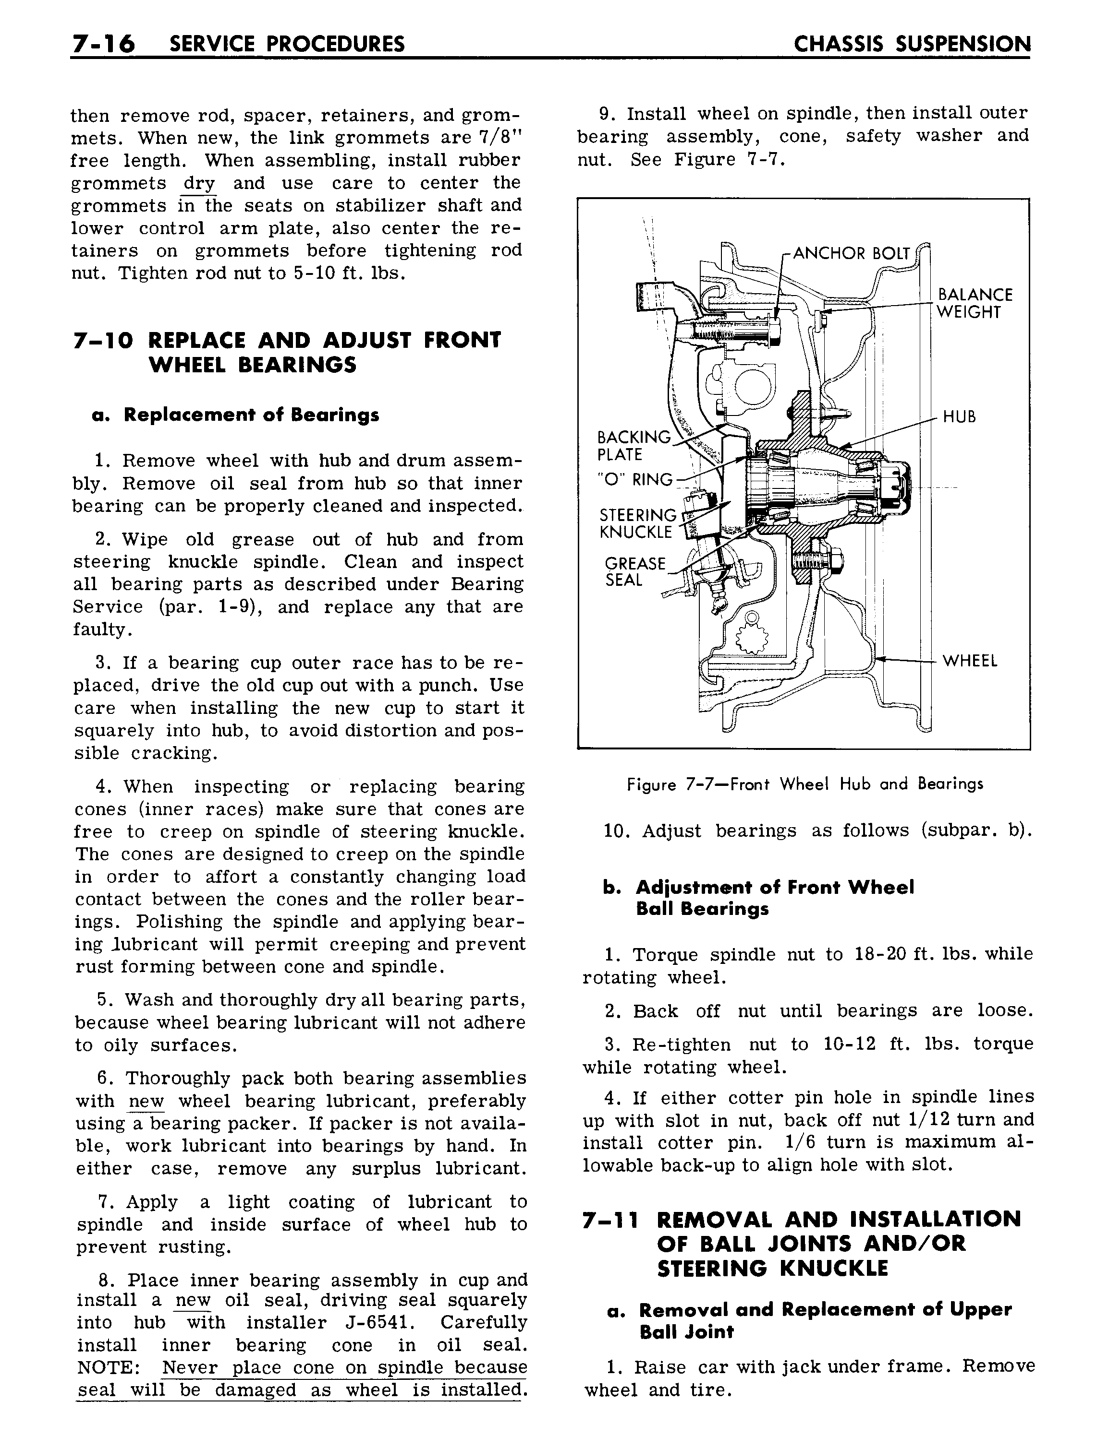 n_07 1961 Buick Shop Manual - Chassis Suspension-016-016.jpg